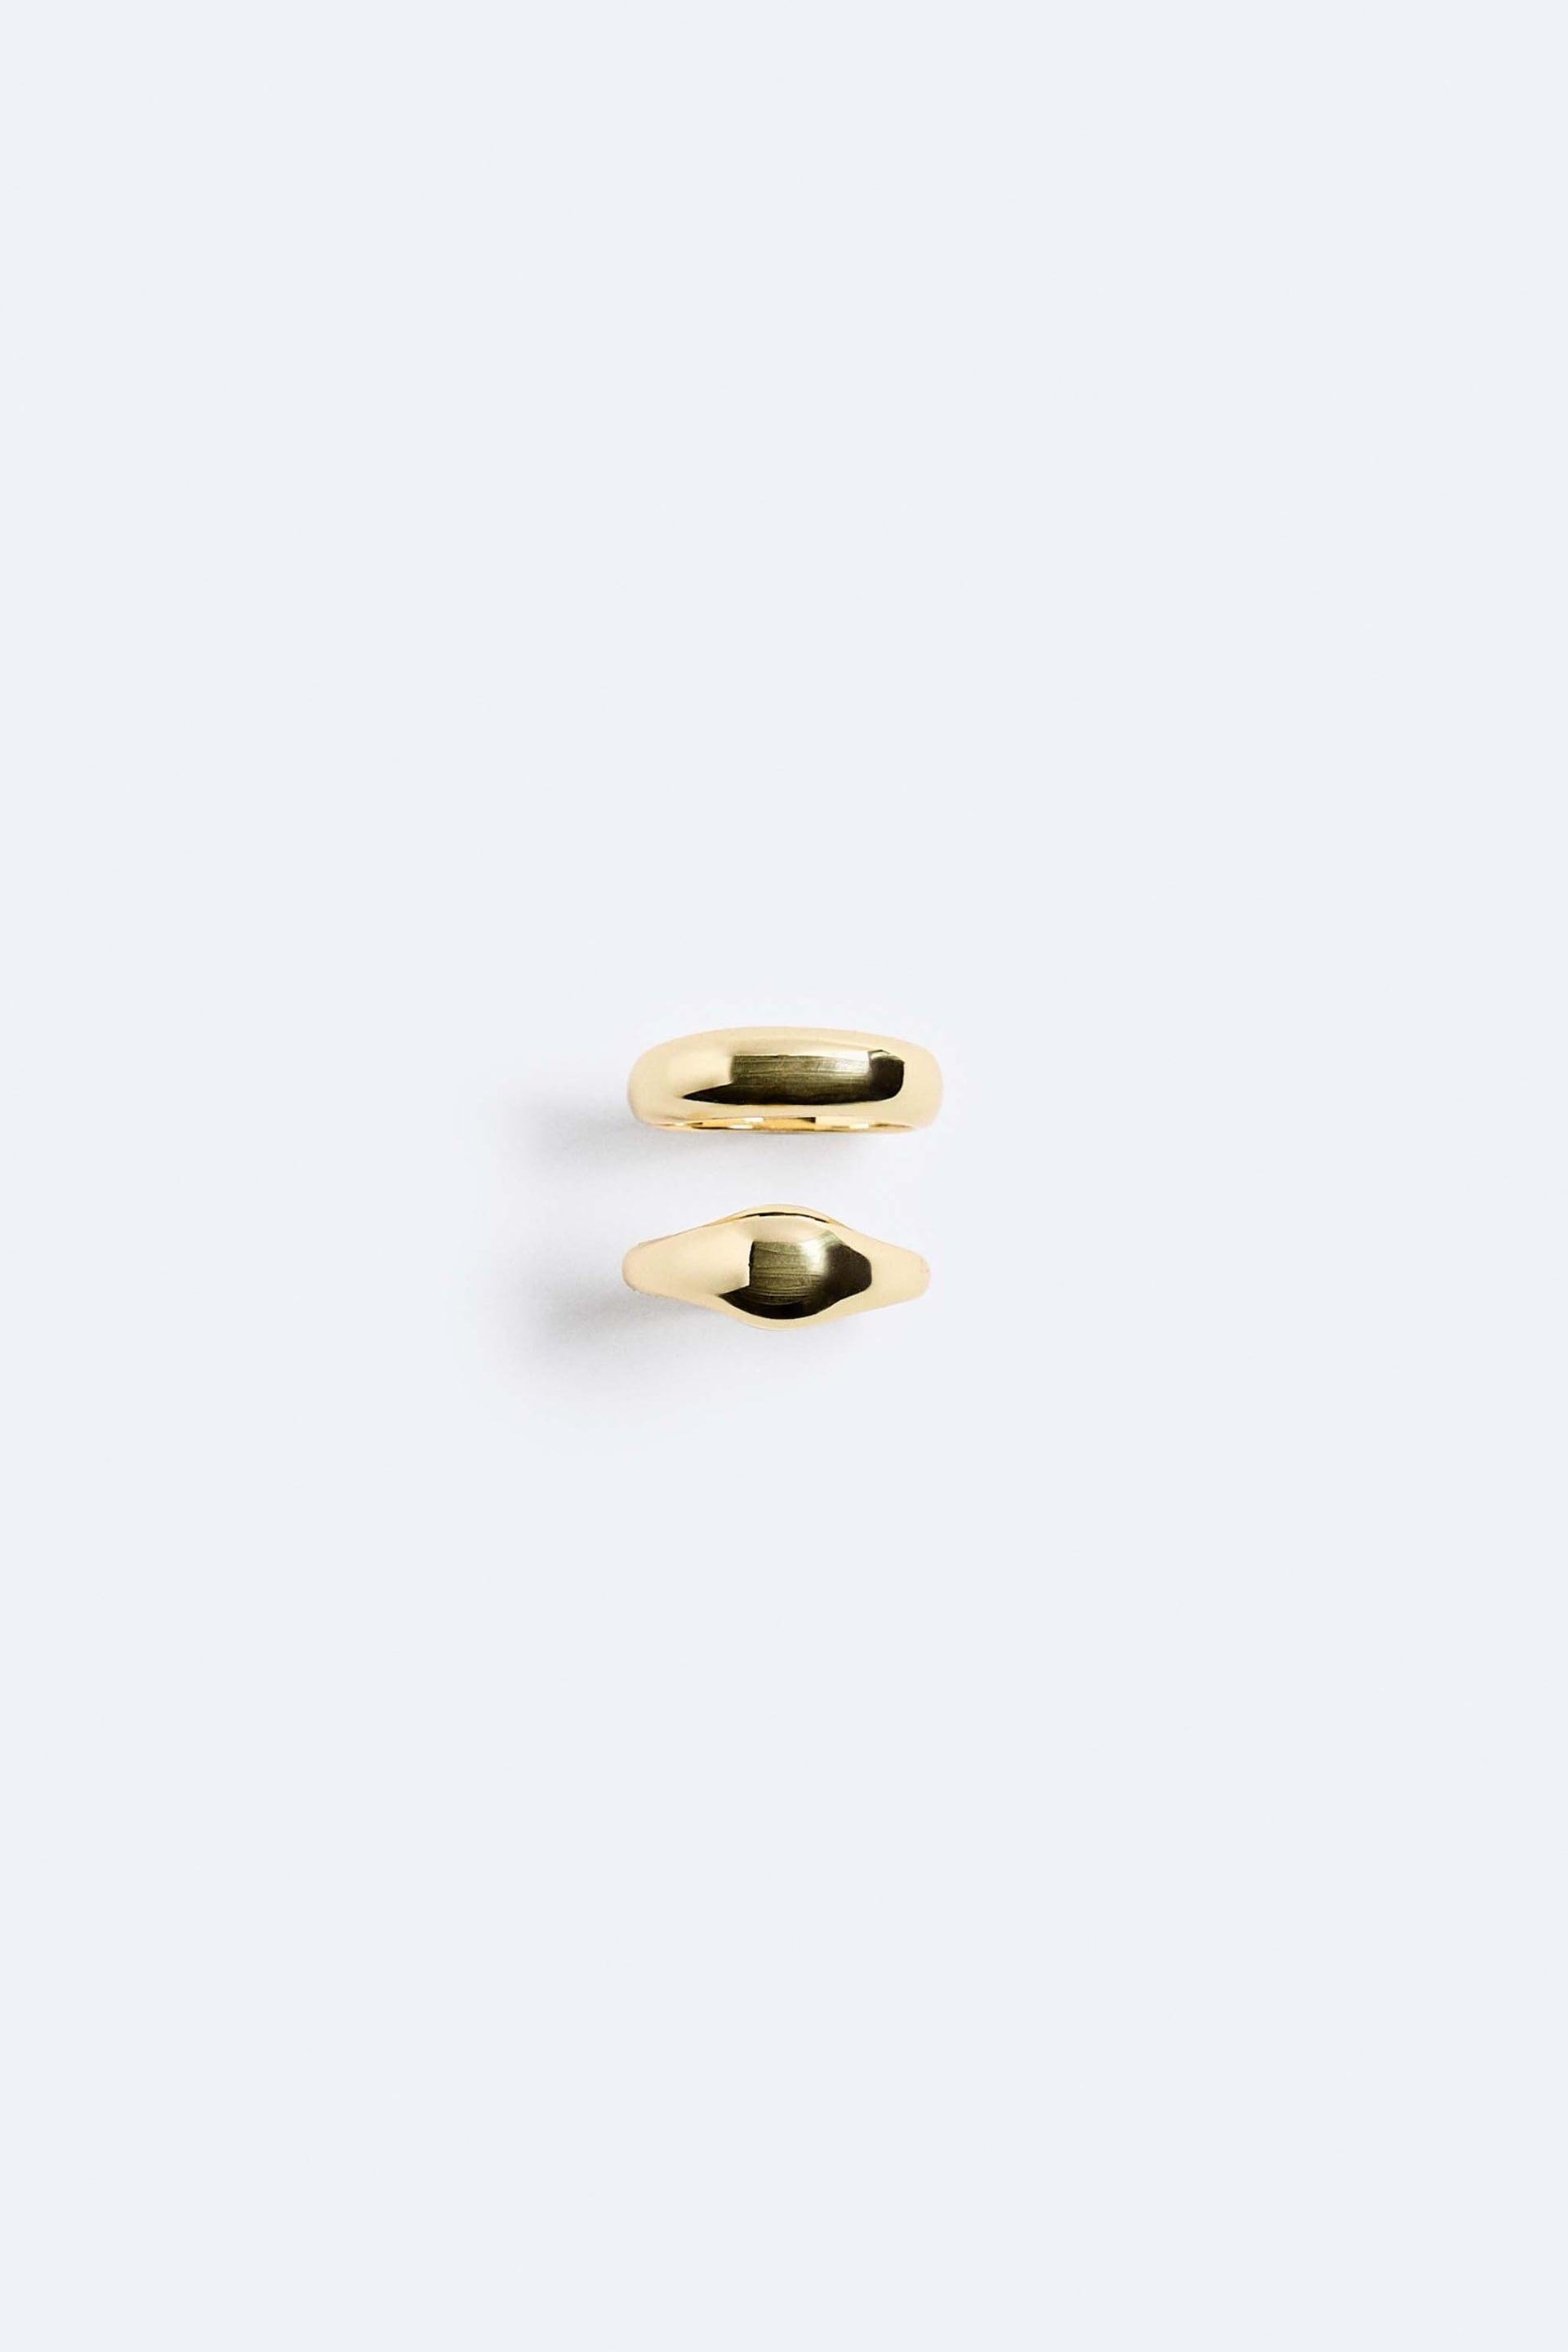 2 PACK OF CONTRASTING RINGS LIMITED EDITION by ZARA